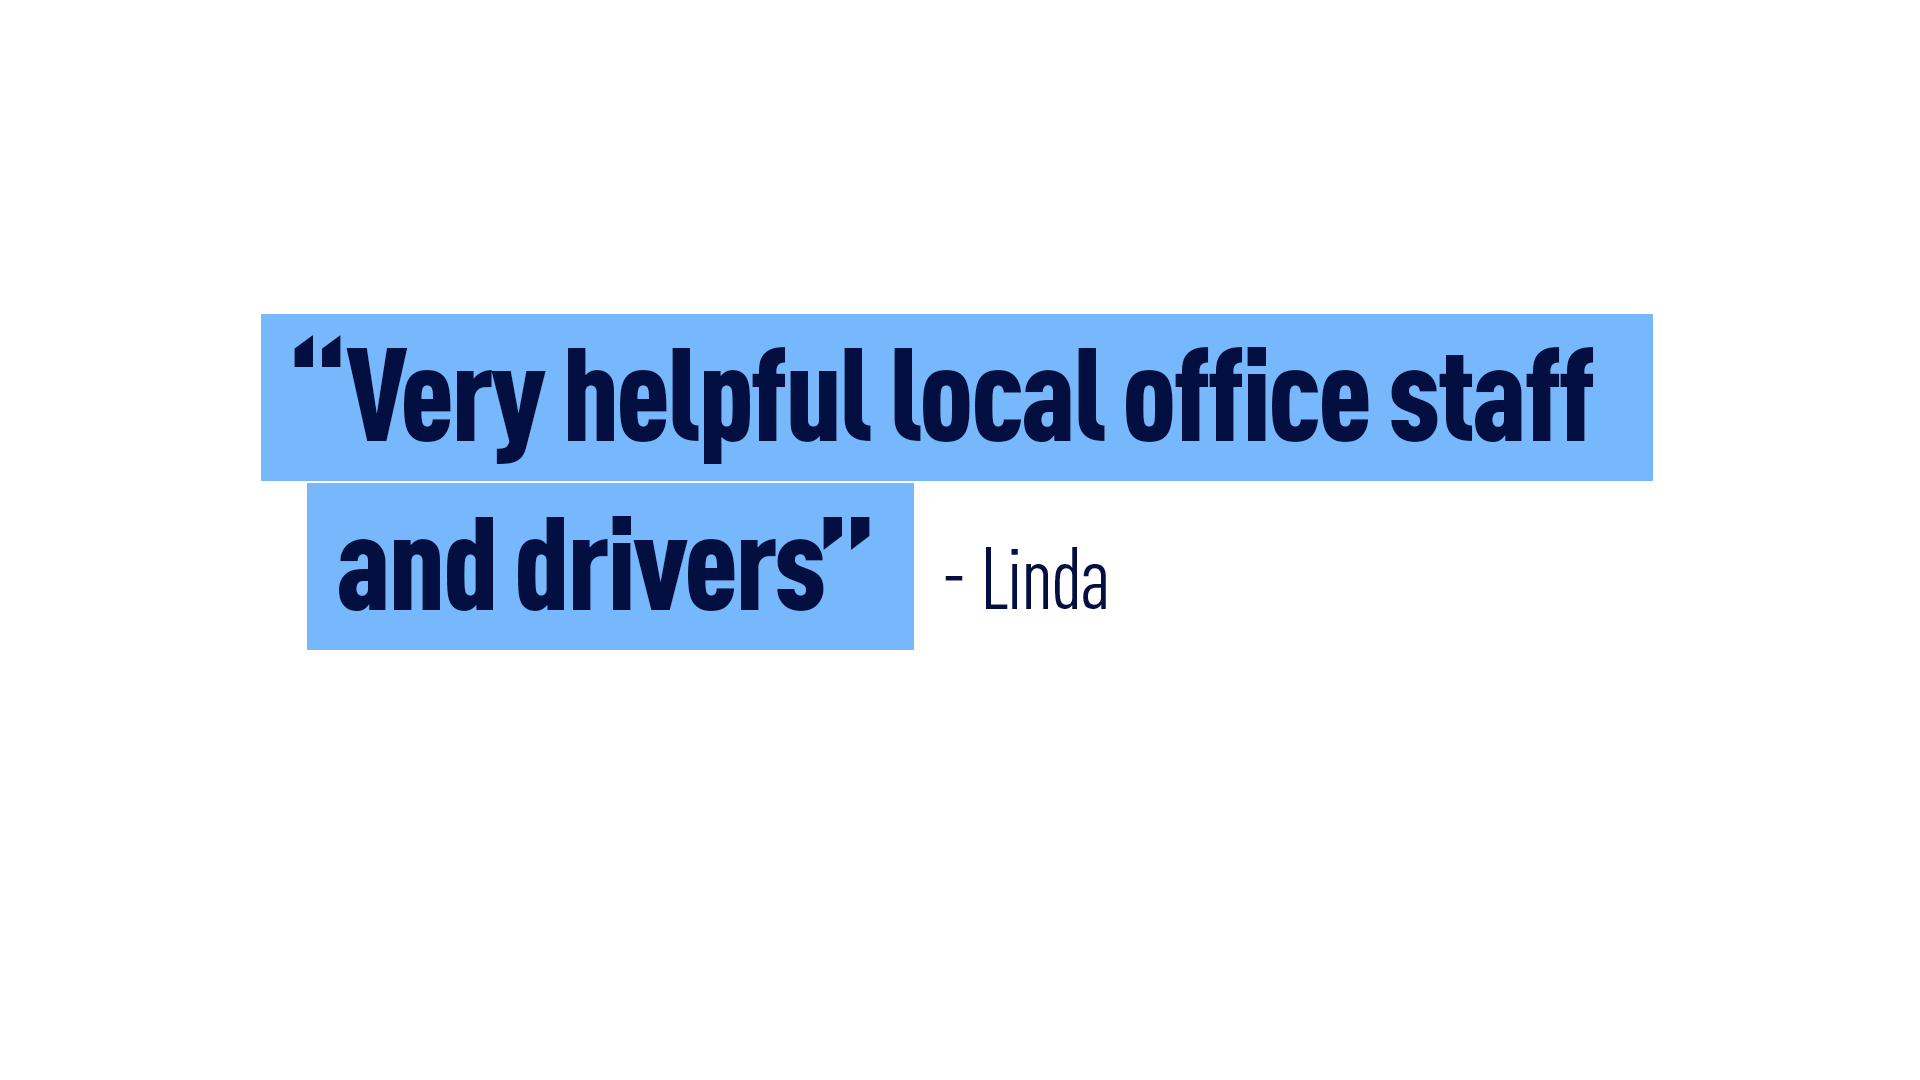 “Very helpful local office staff and drivers” Linda